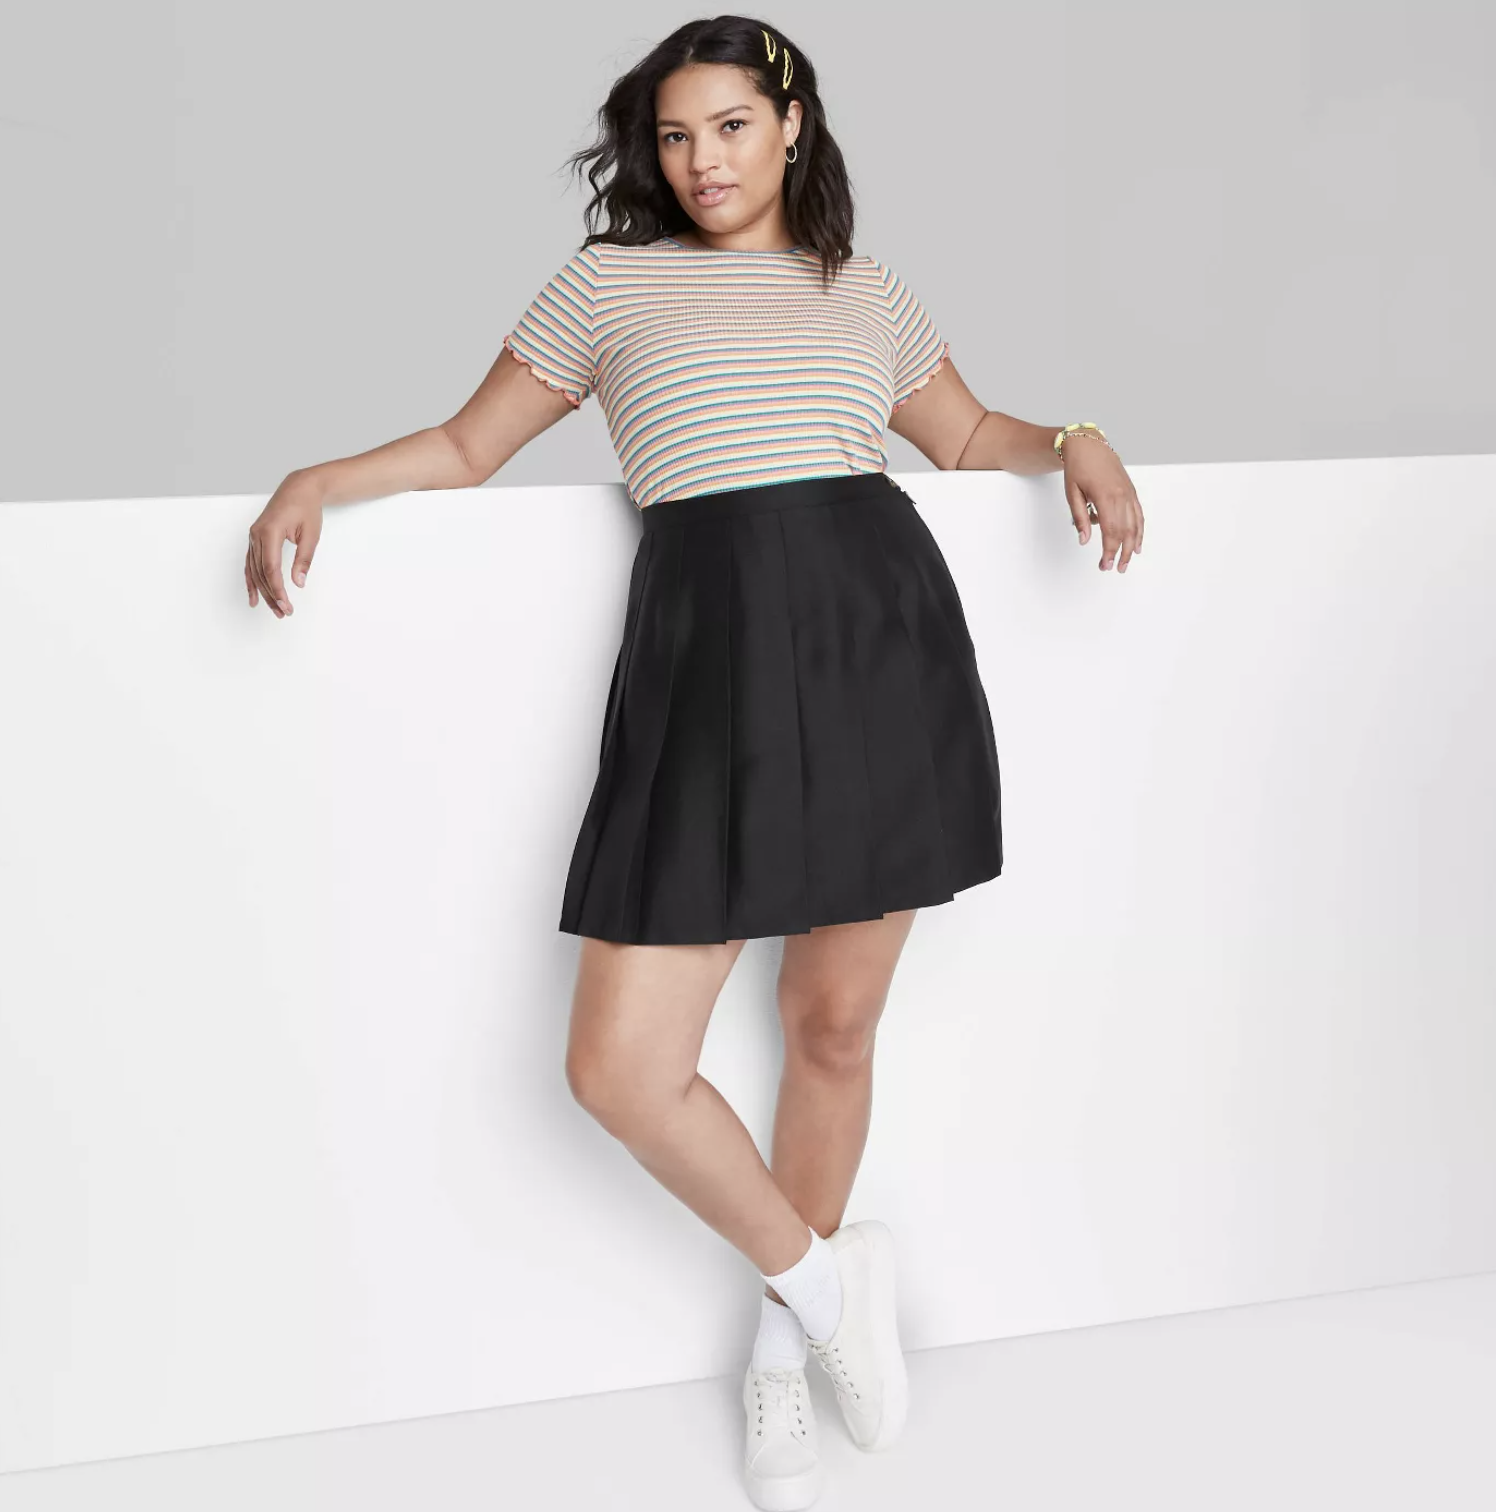 model wearing the skirt in black with a striped top and white sneakers